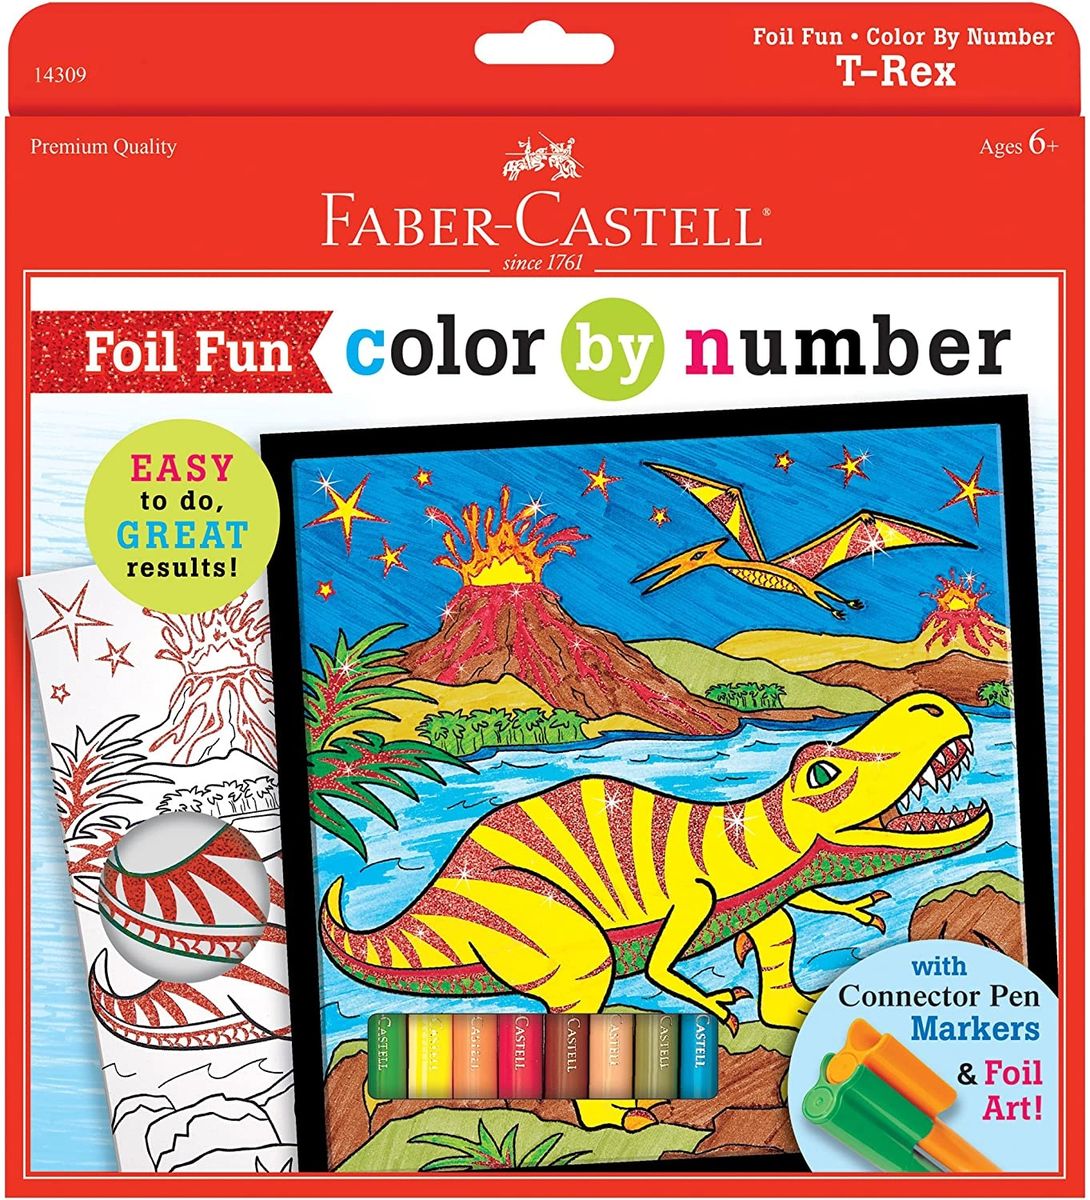  Faber-Castell Color by Number Foil Fun - T-Rex - Color and  Display 1 Dinosaur Color by Number Board : Arts, Crafts & Sewing